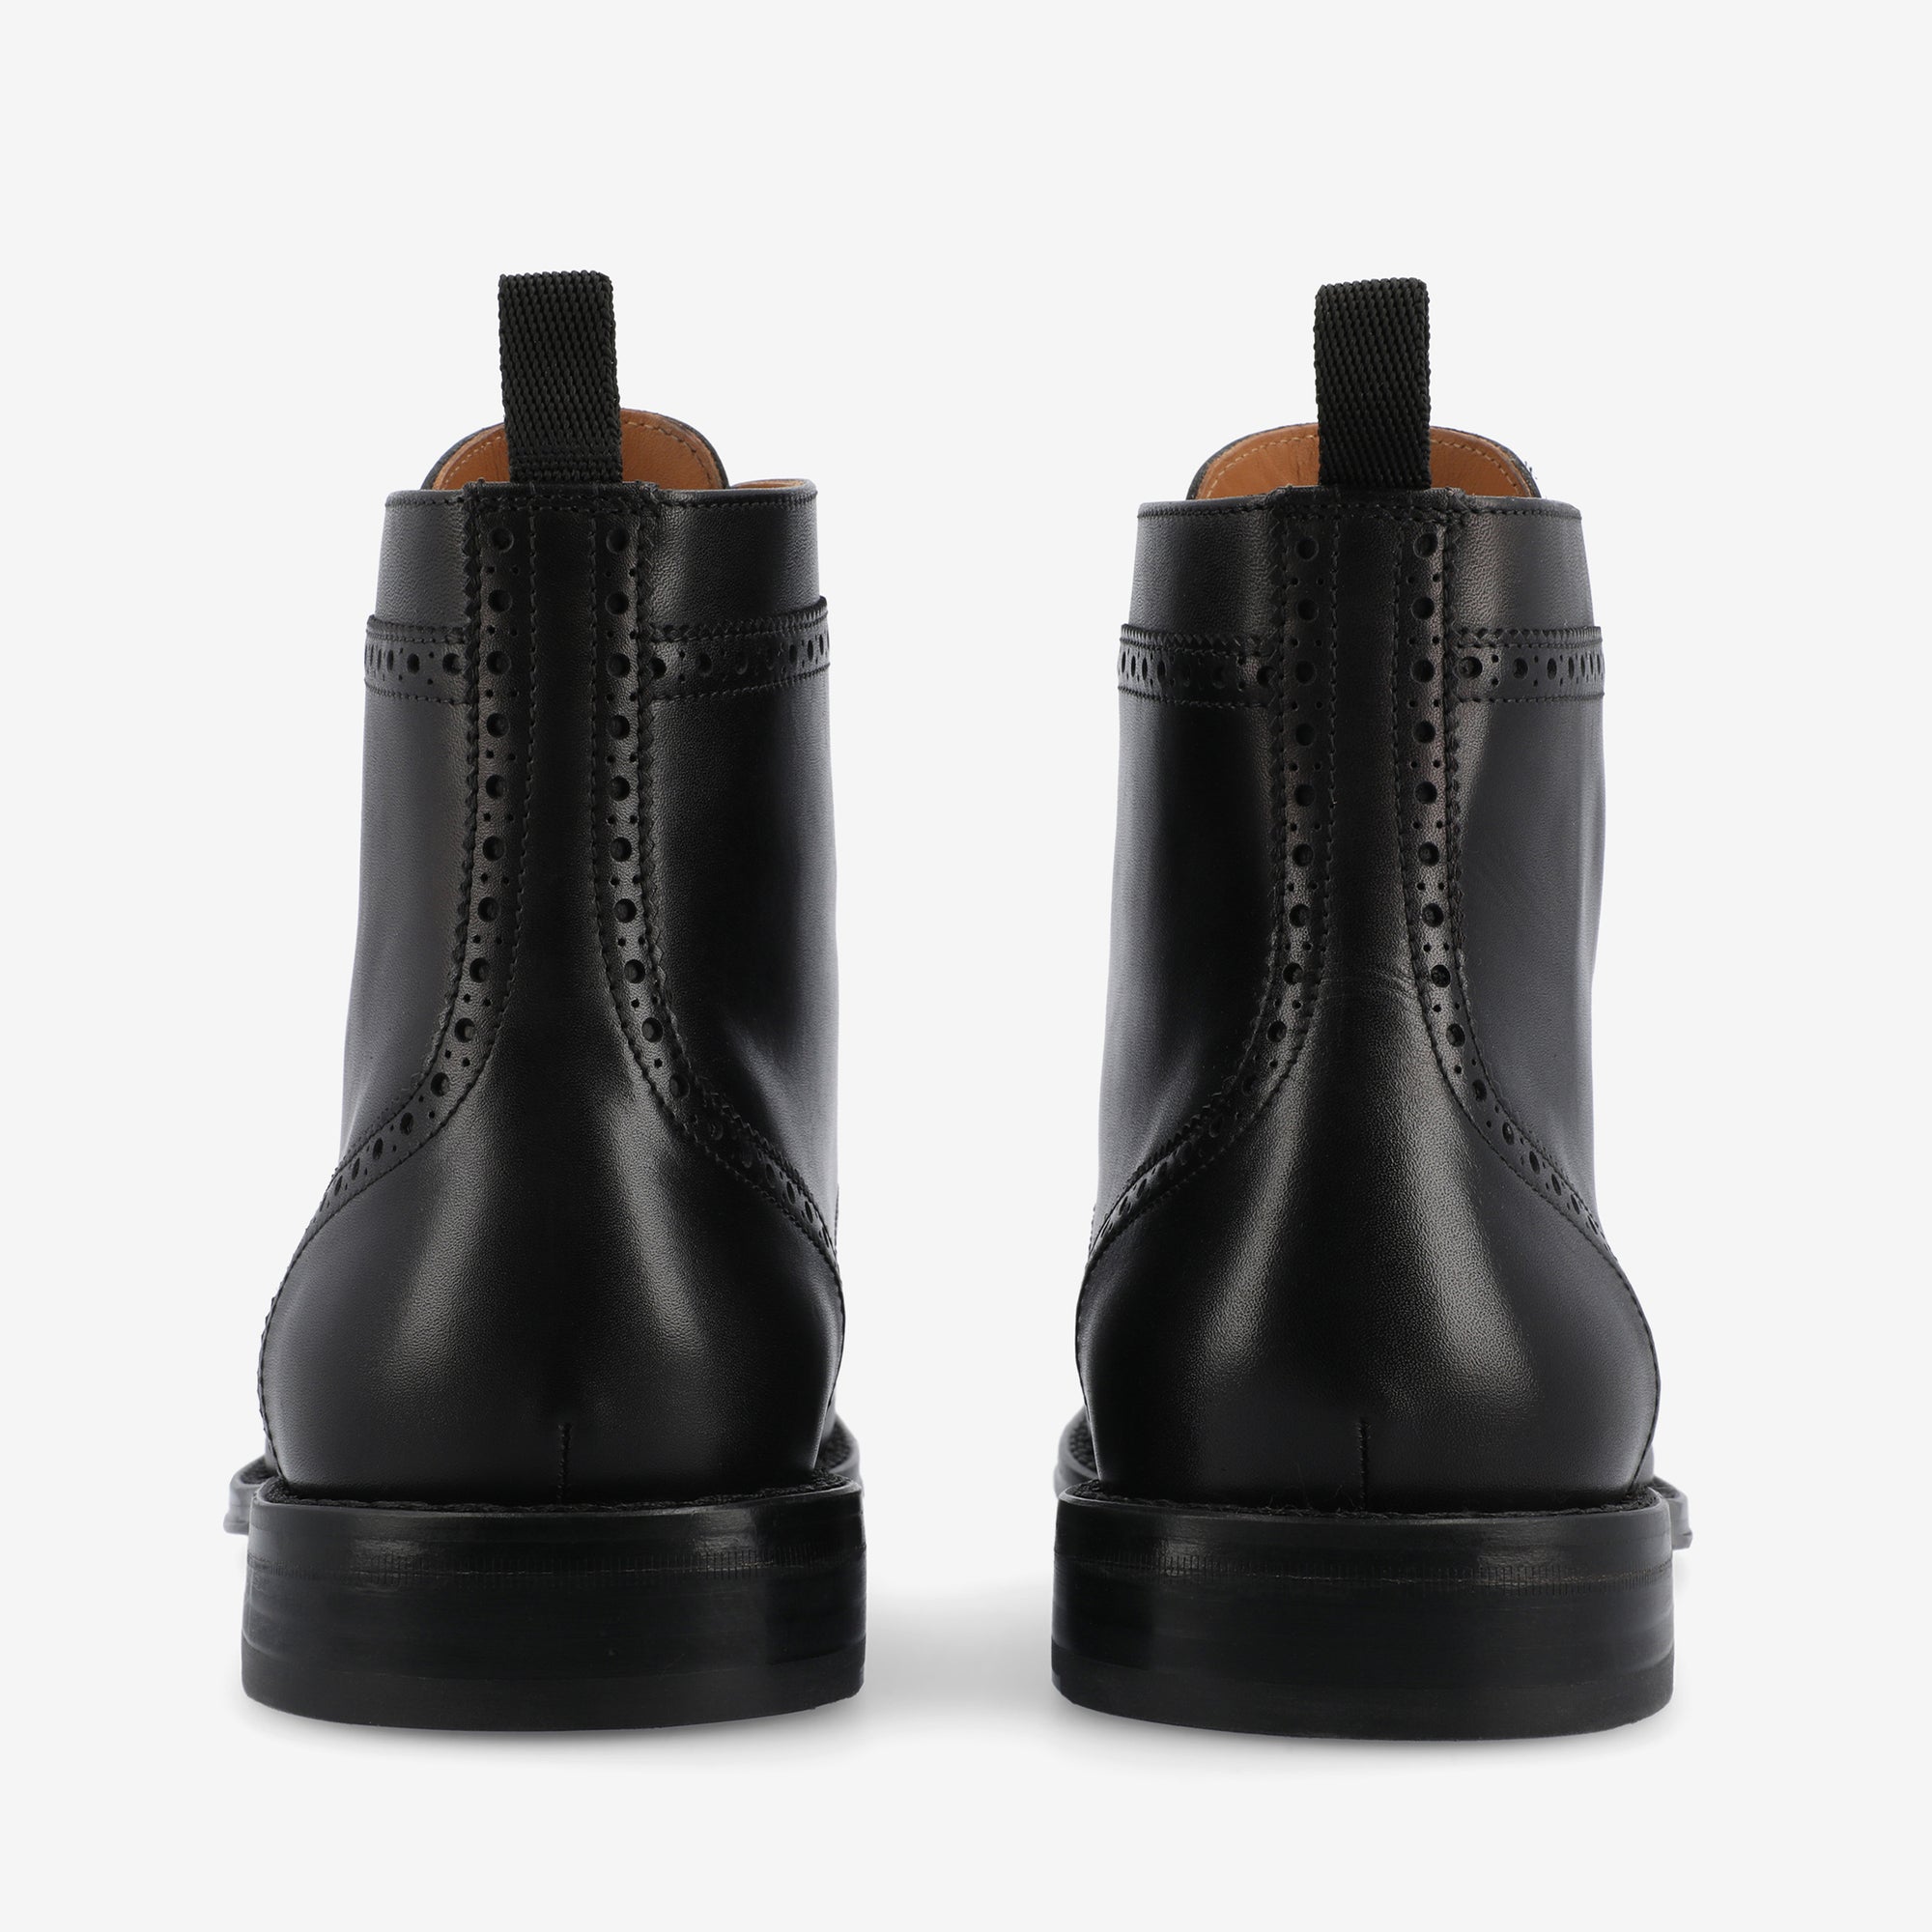 The Noah Boot in Black